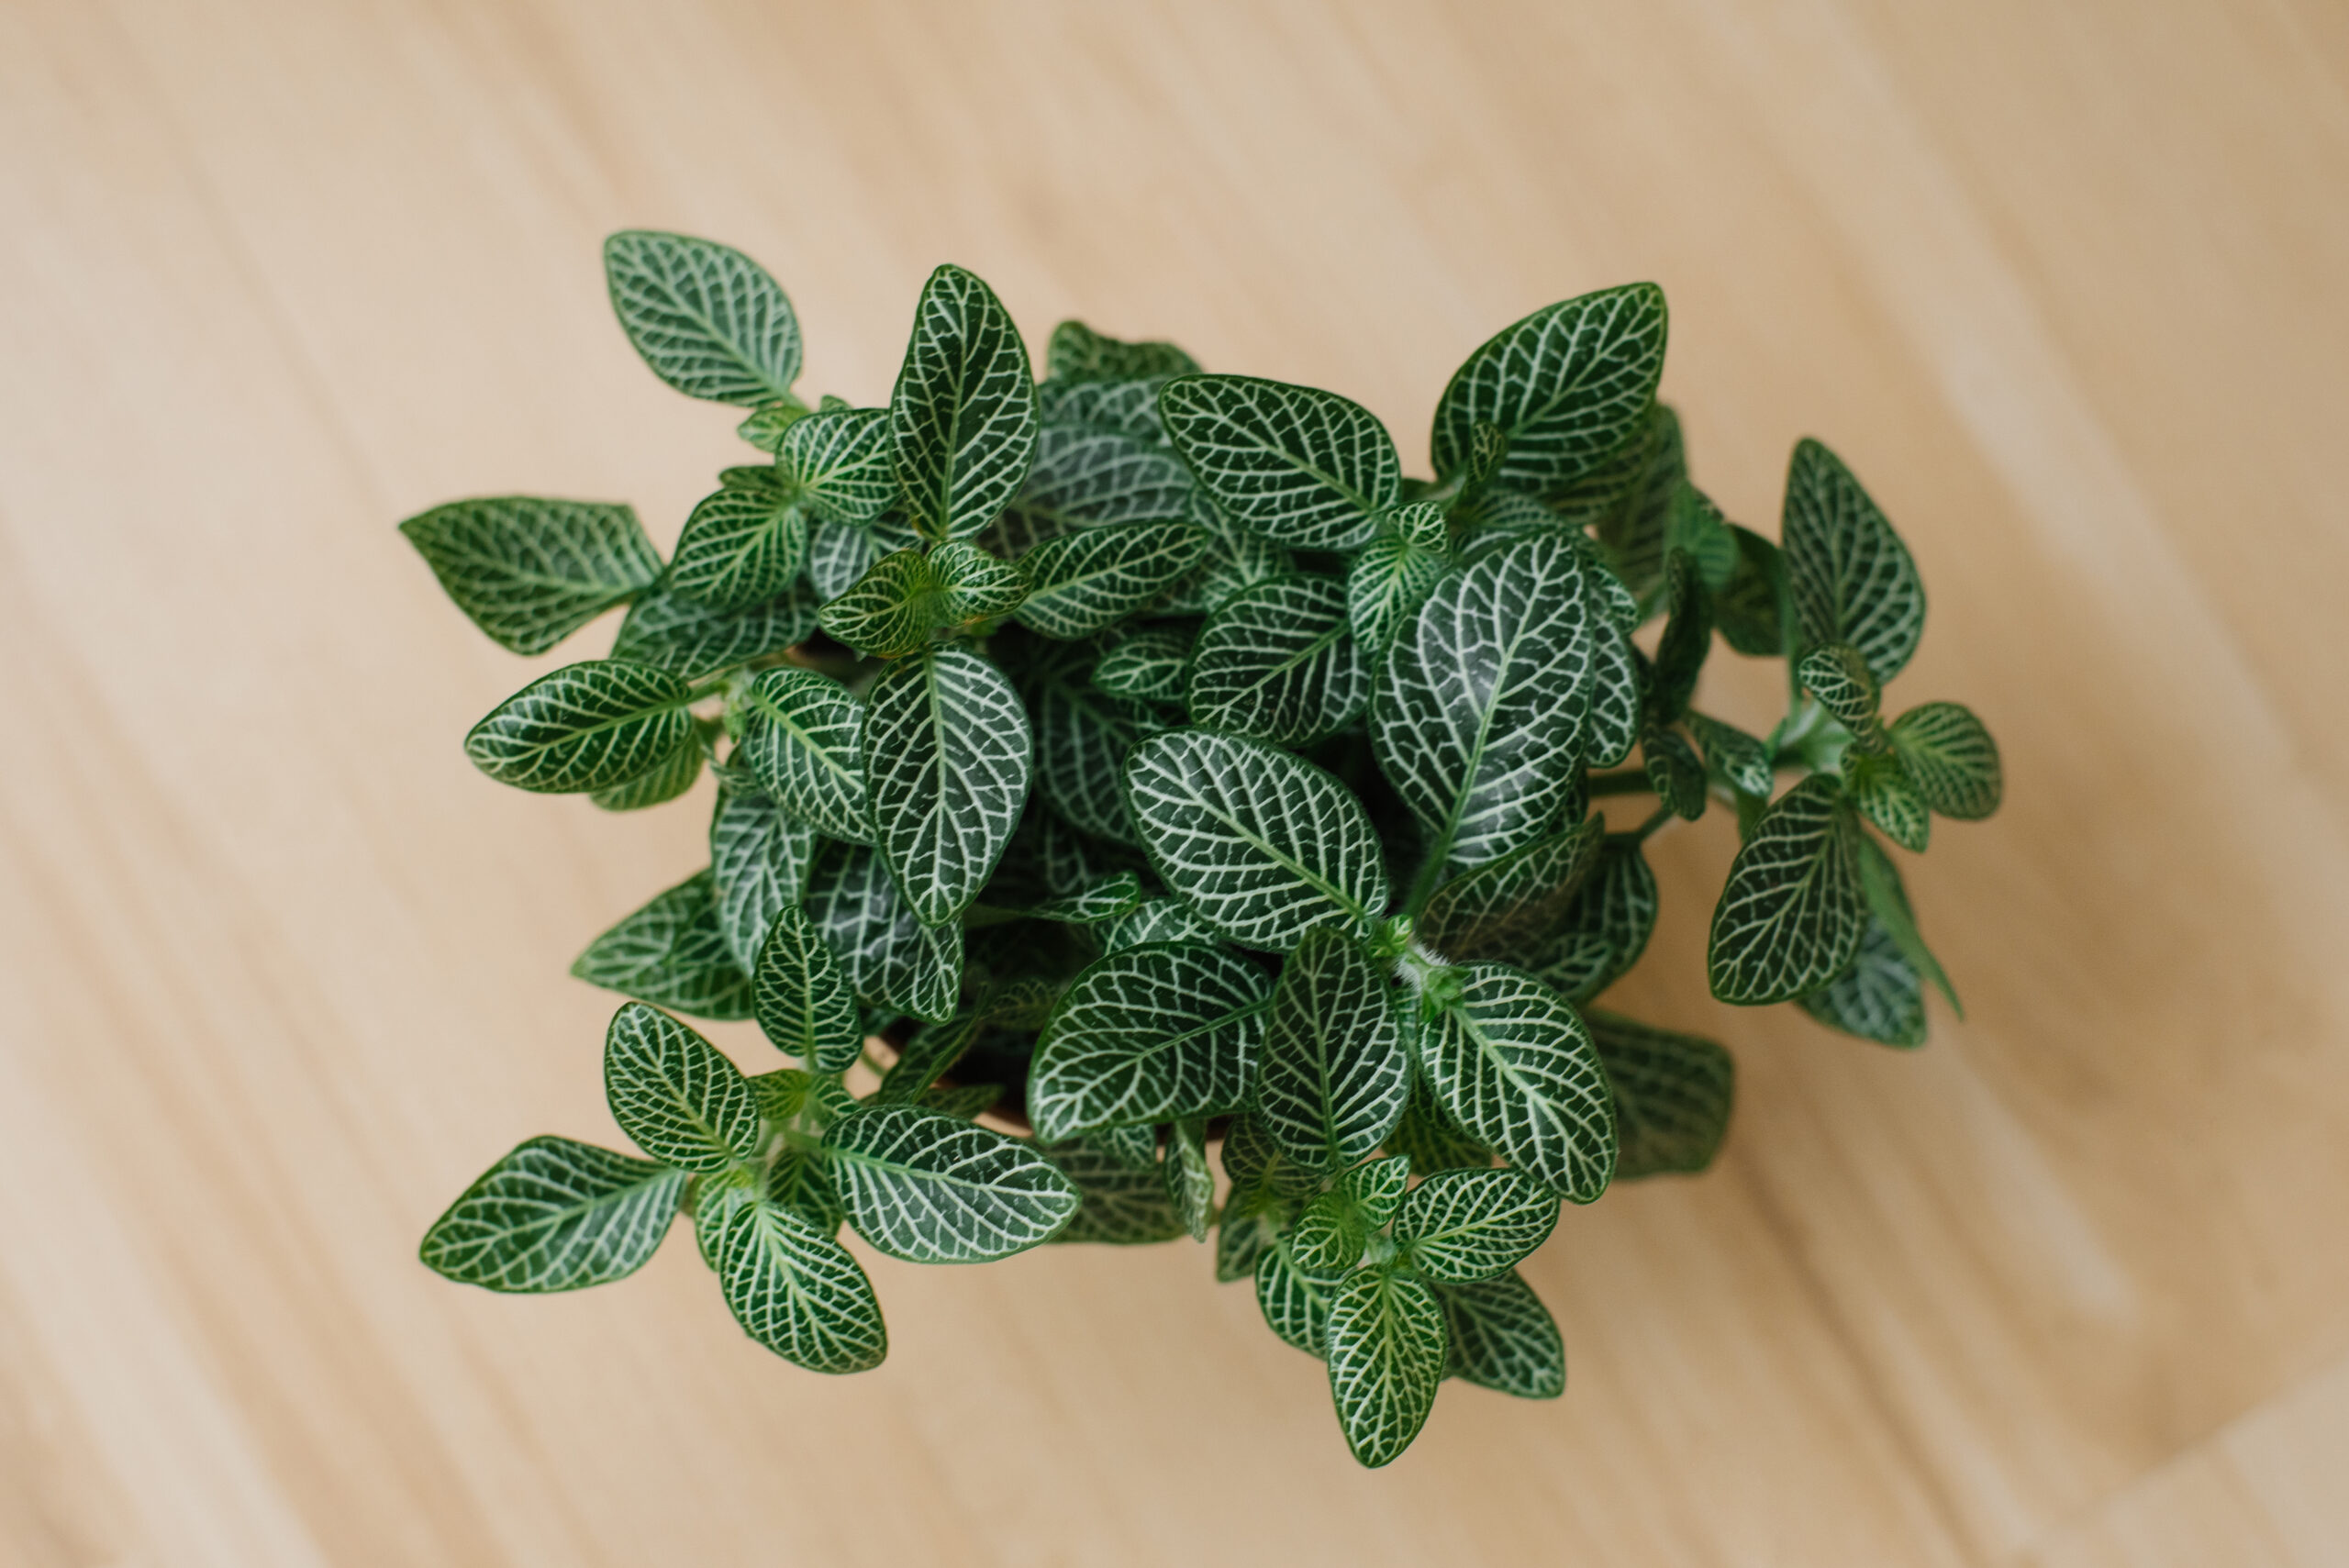 houseplant fittonia dark green with white streaks in a brown pot on a beige background with boards. Top view